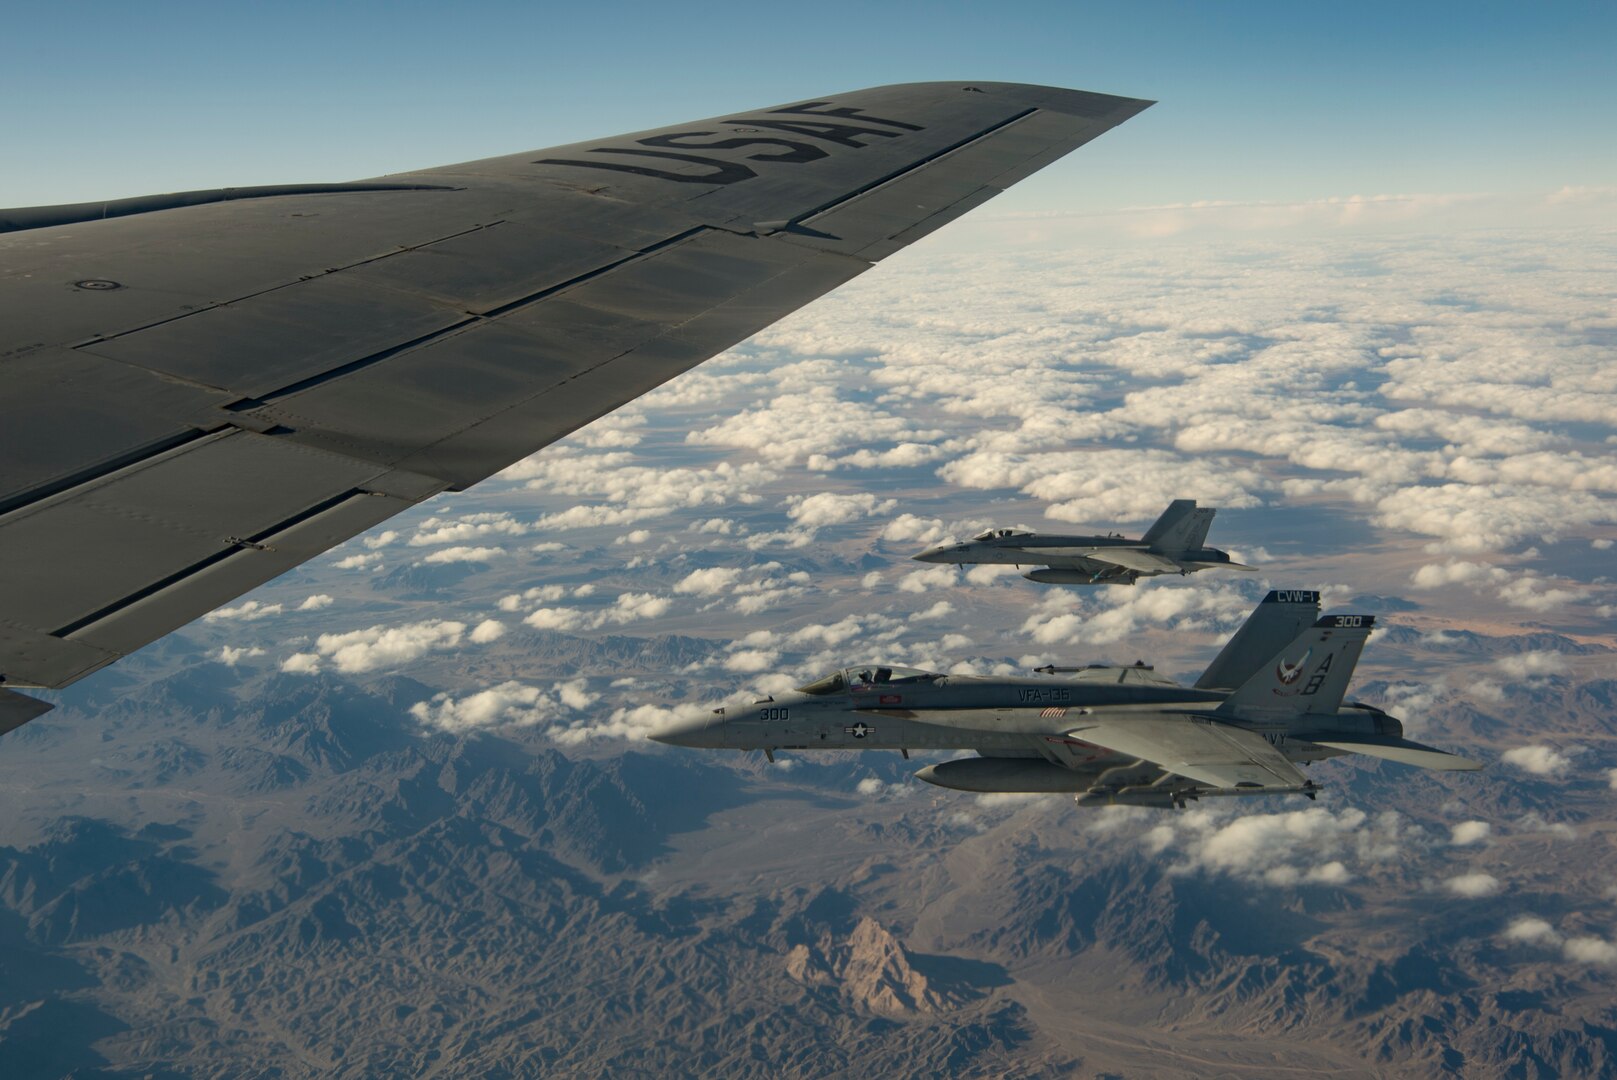 Two U.S. Navy F/A-18 Super Hornet fly alongside a KC-135 Stratotanker assigned to the 28th Expeditionary Air Refueling Squadron over Afghanistan, Jan. 14, 2020.